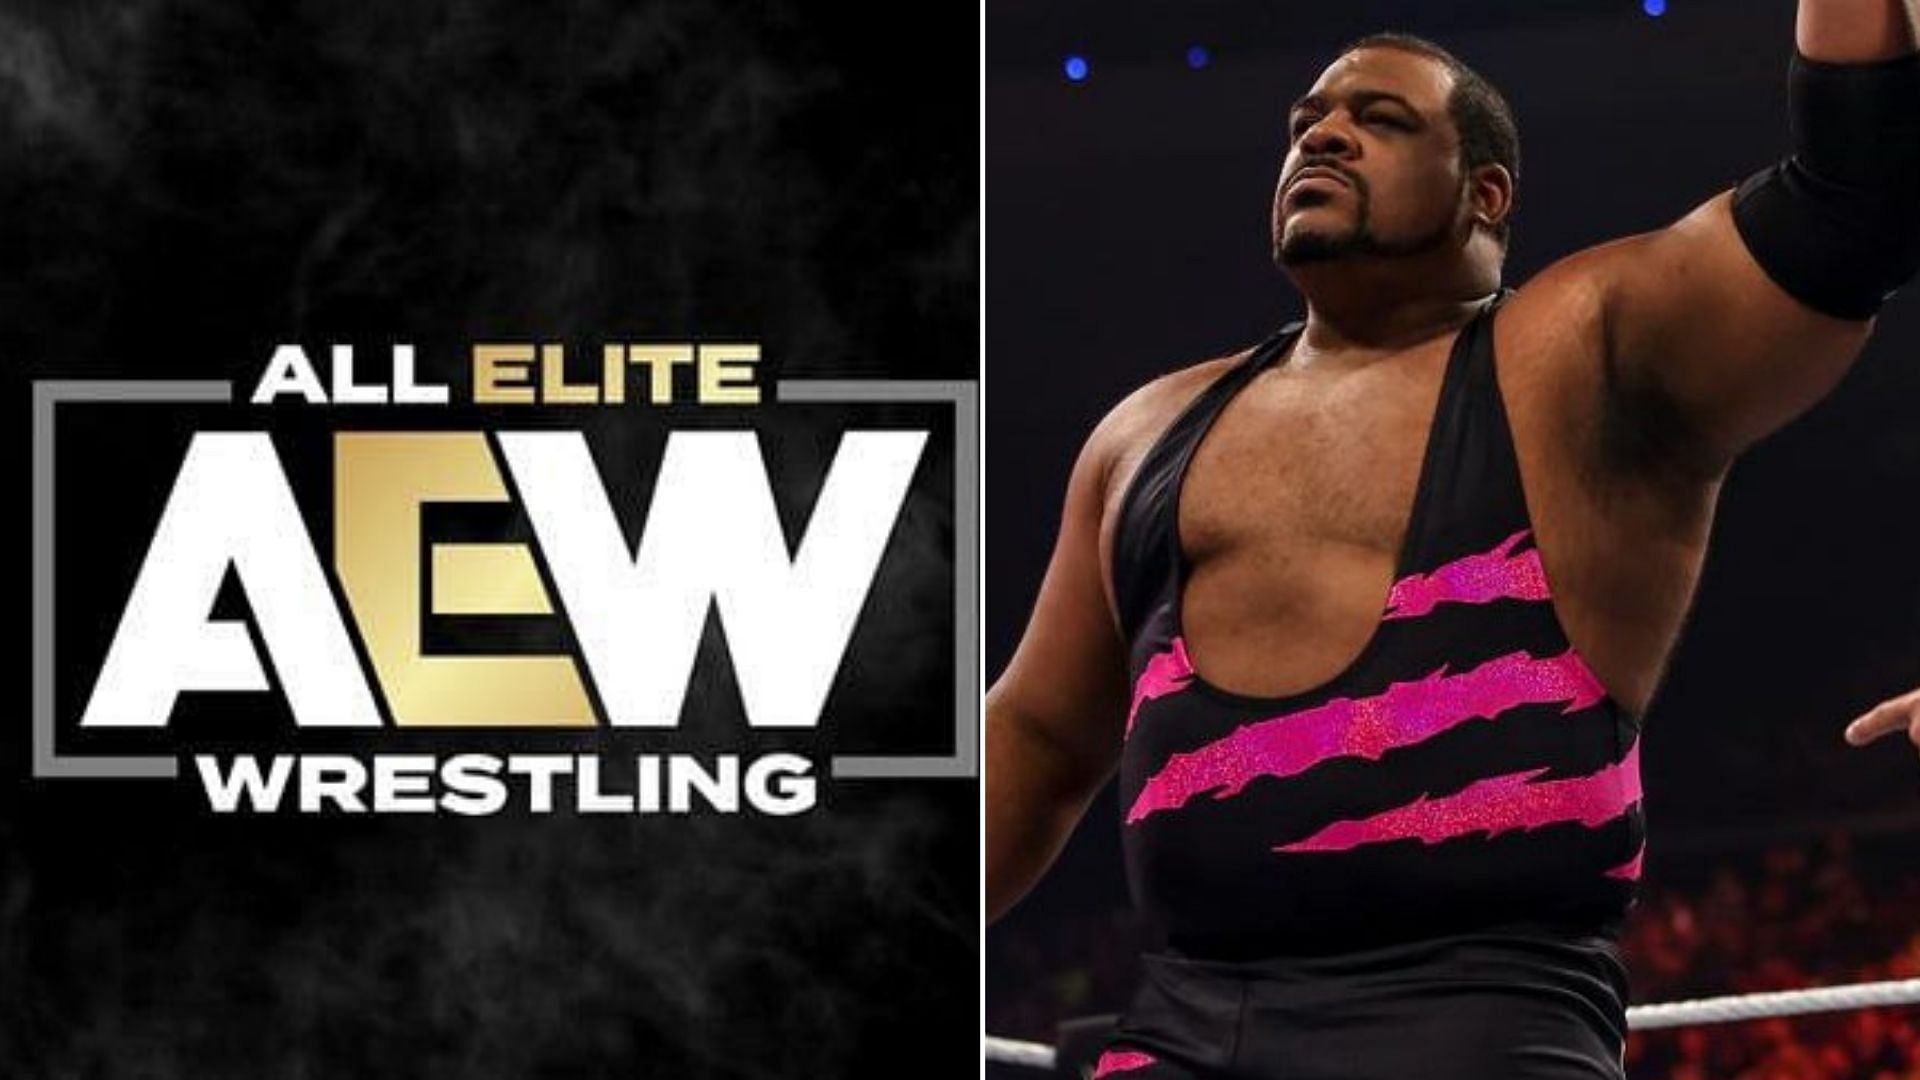 Keith Lee has been the talk of the town since his no-compete expired